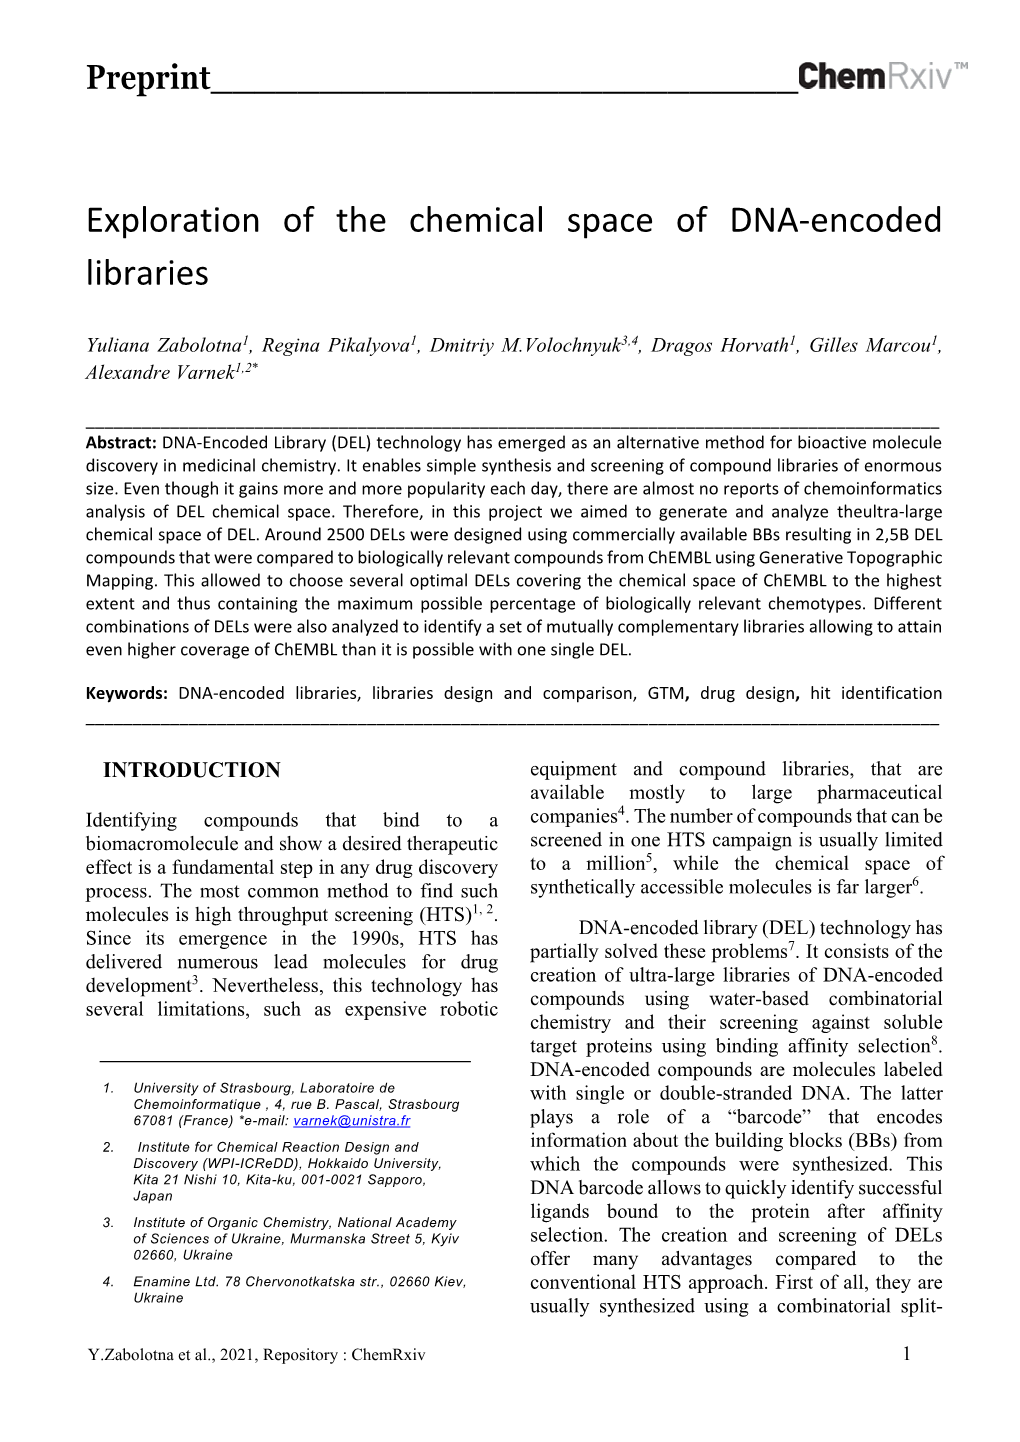 Exploration of the Chemical Space of DNA-Encoded Libraries